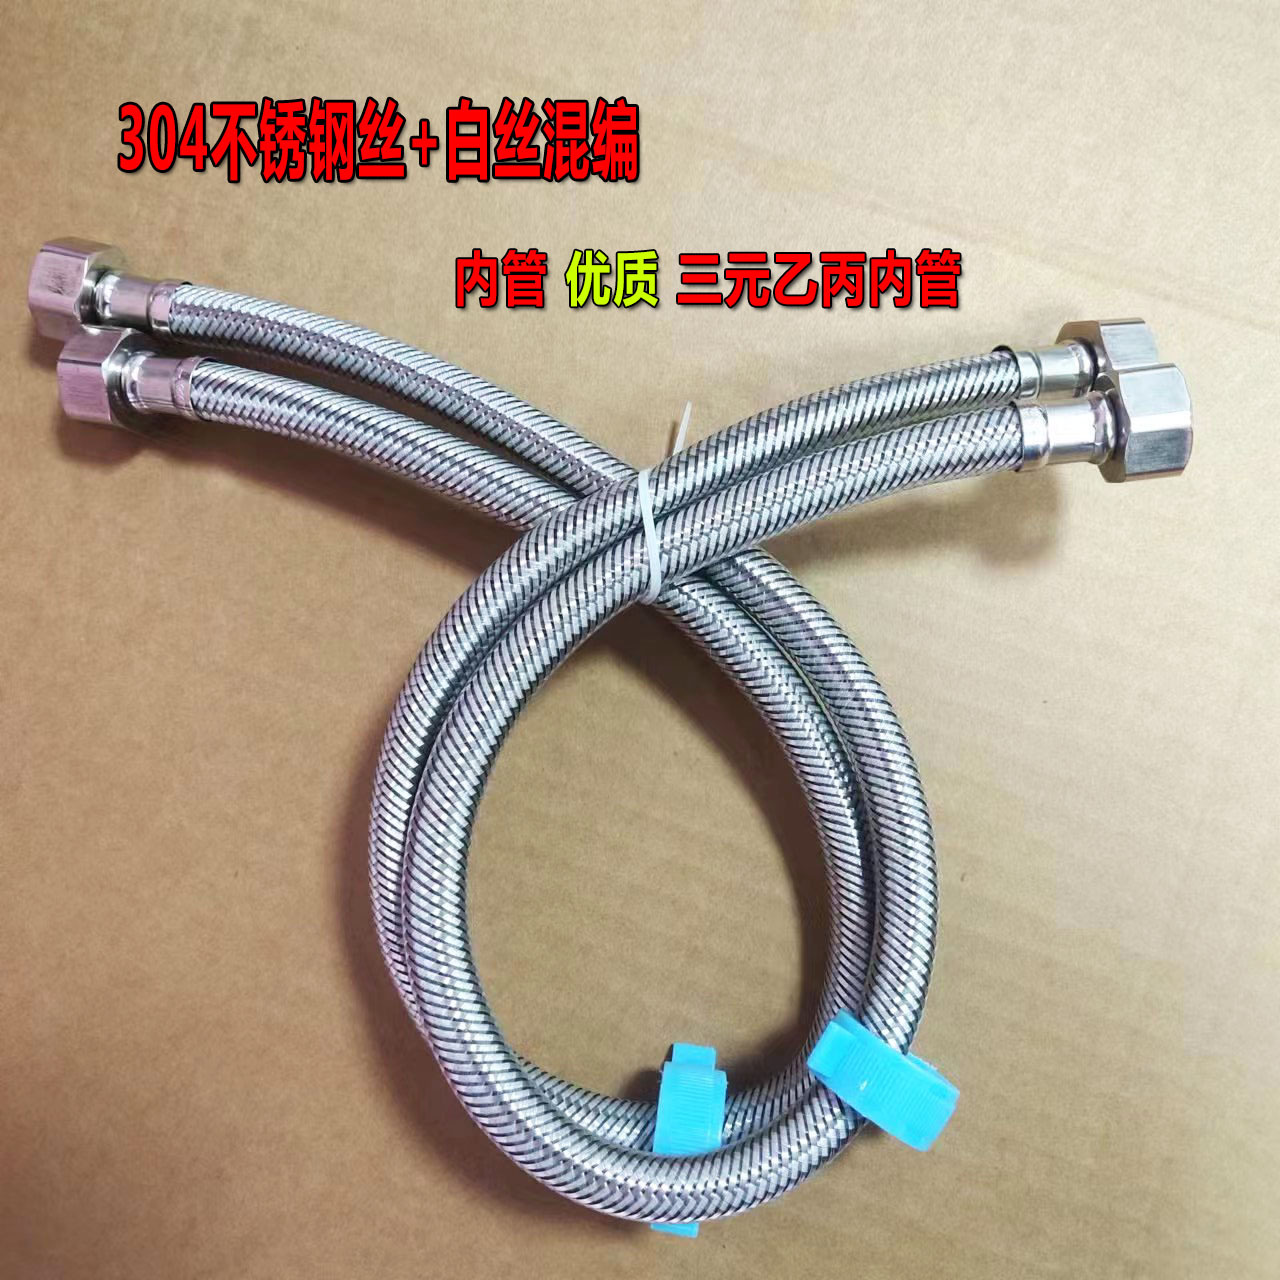 High Quality Stainless Steel Wire Transparent Silk Mixed Hose Faucet Toilet Water Hose Endless Wired Hose